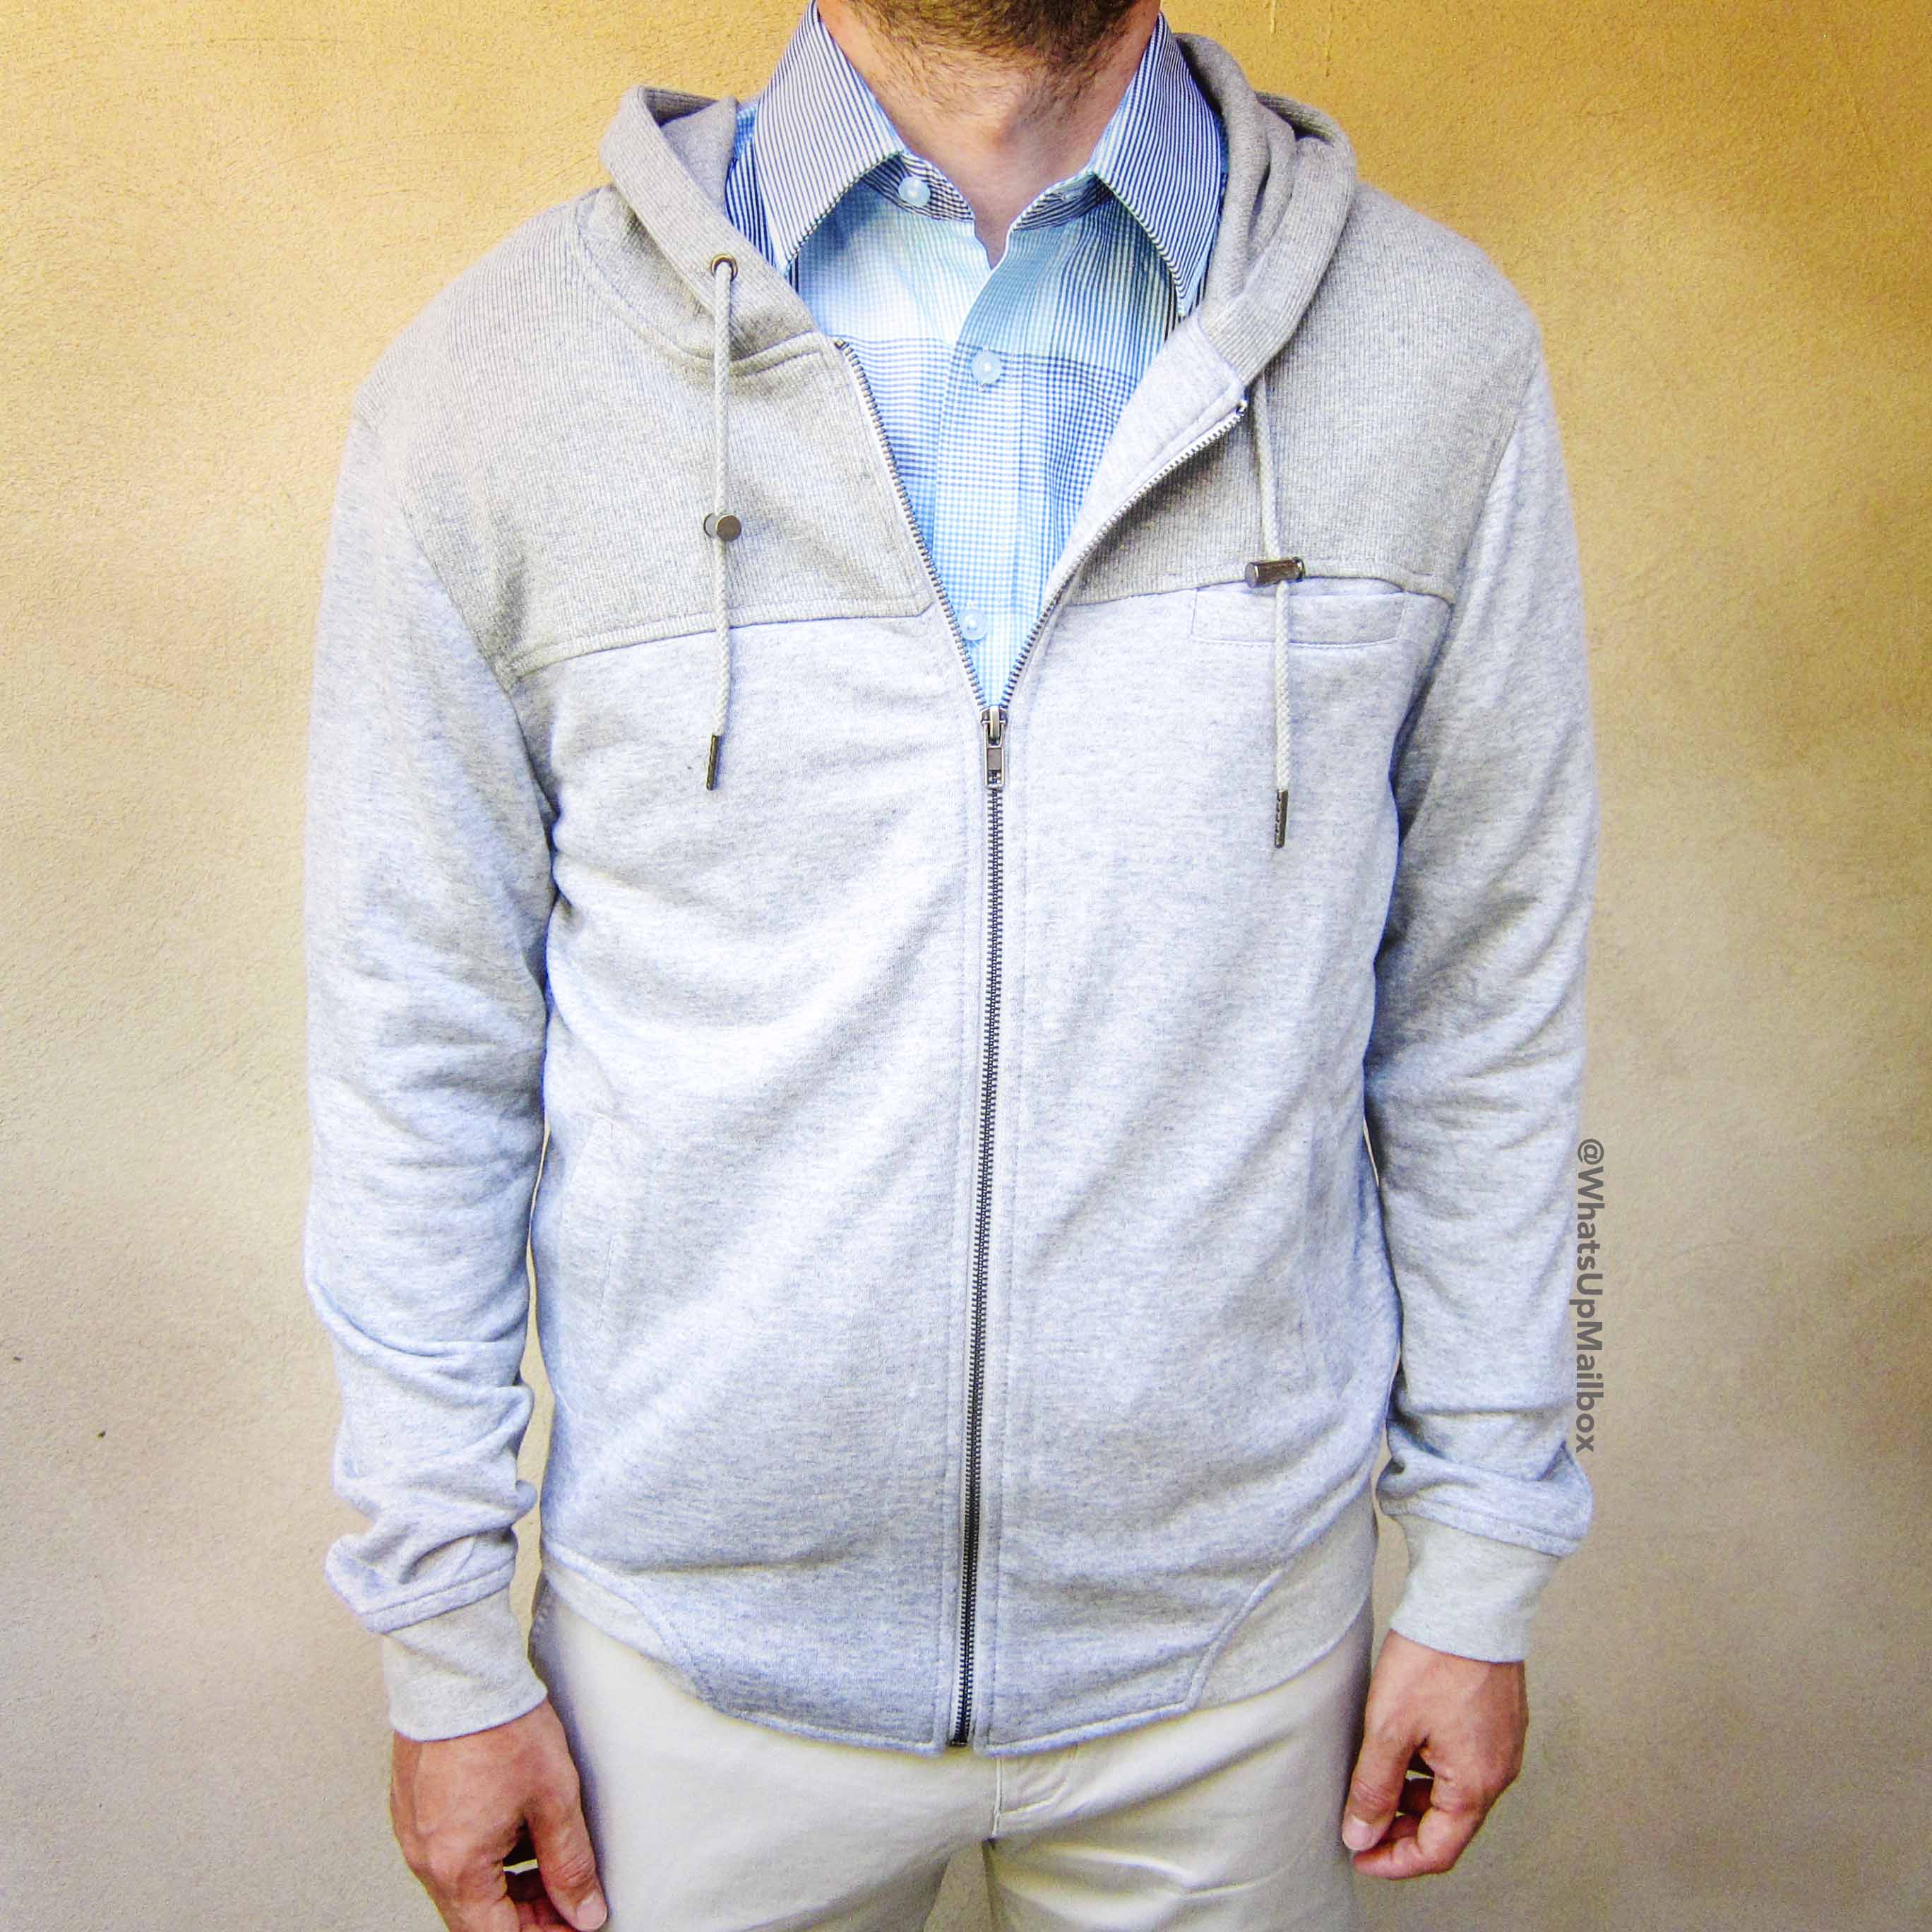 Trendy Butler - Standard Issue NYC Grey Sweater